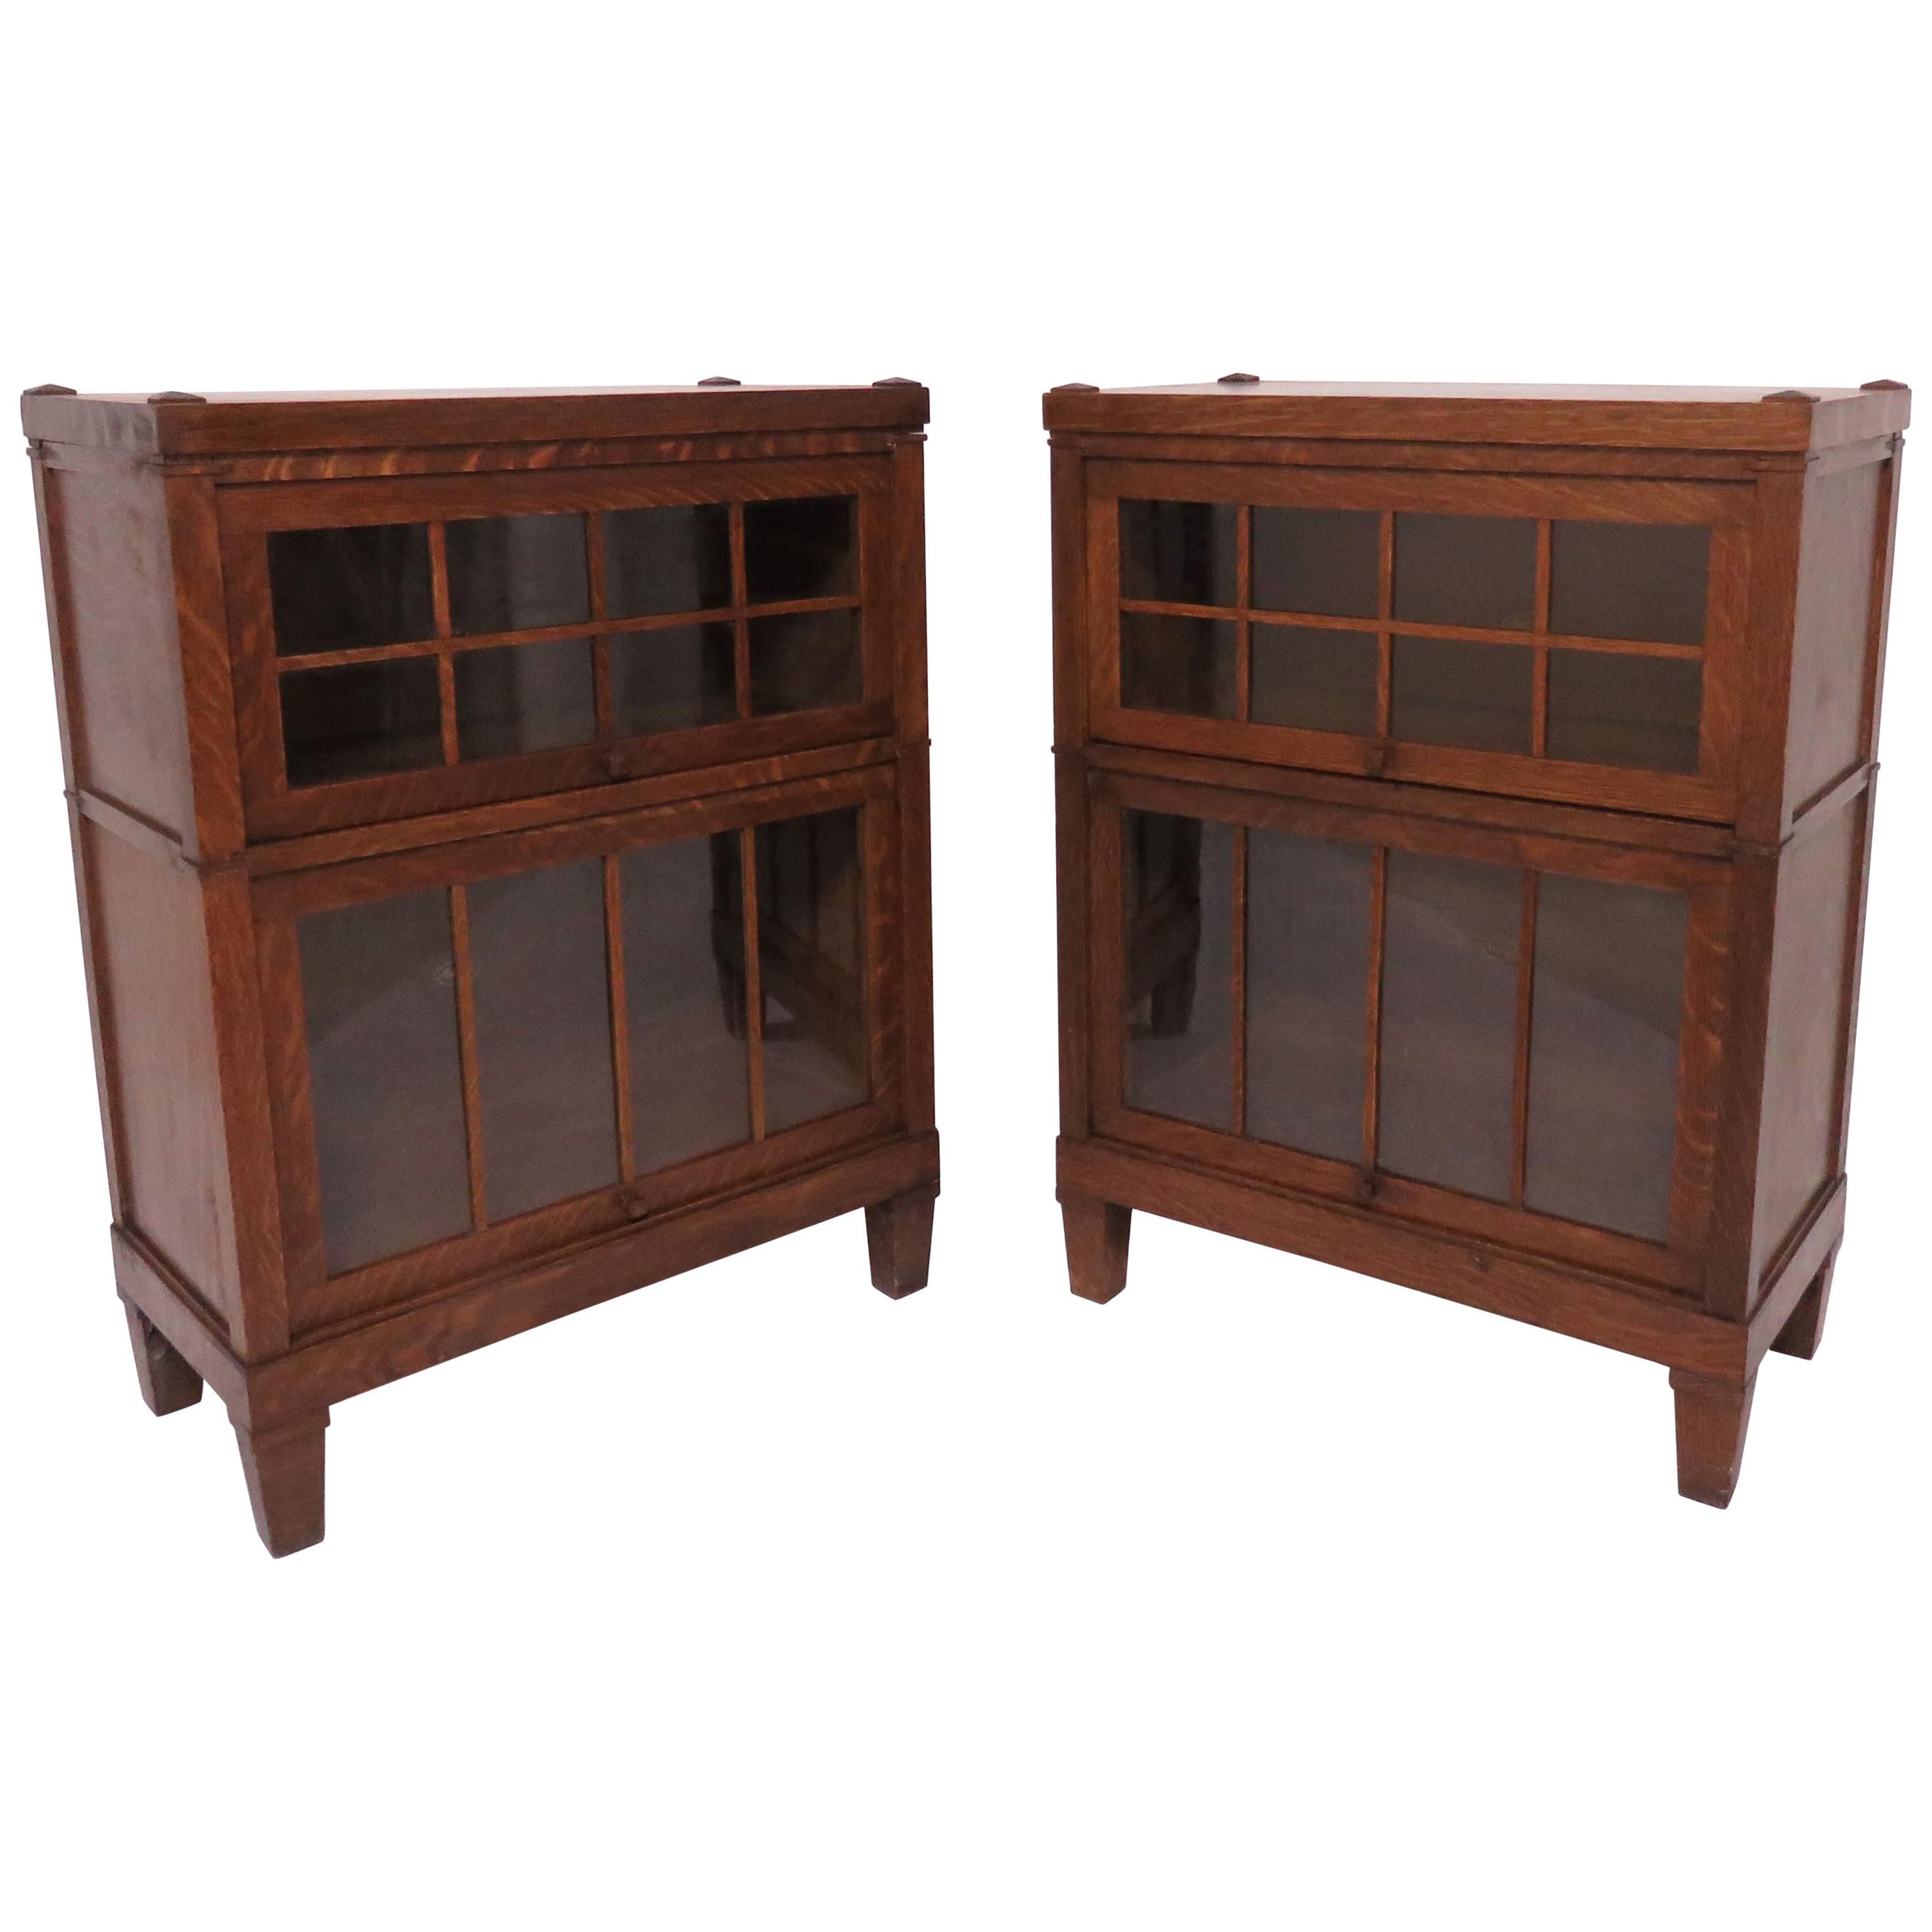 Pair of Mission Oak Arts & Crafts Barrister Bookcase Cabinets by Macey Co.